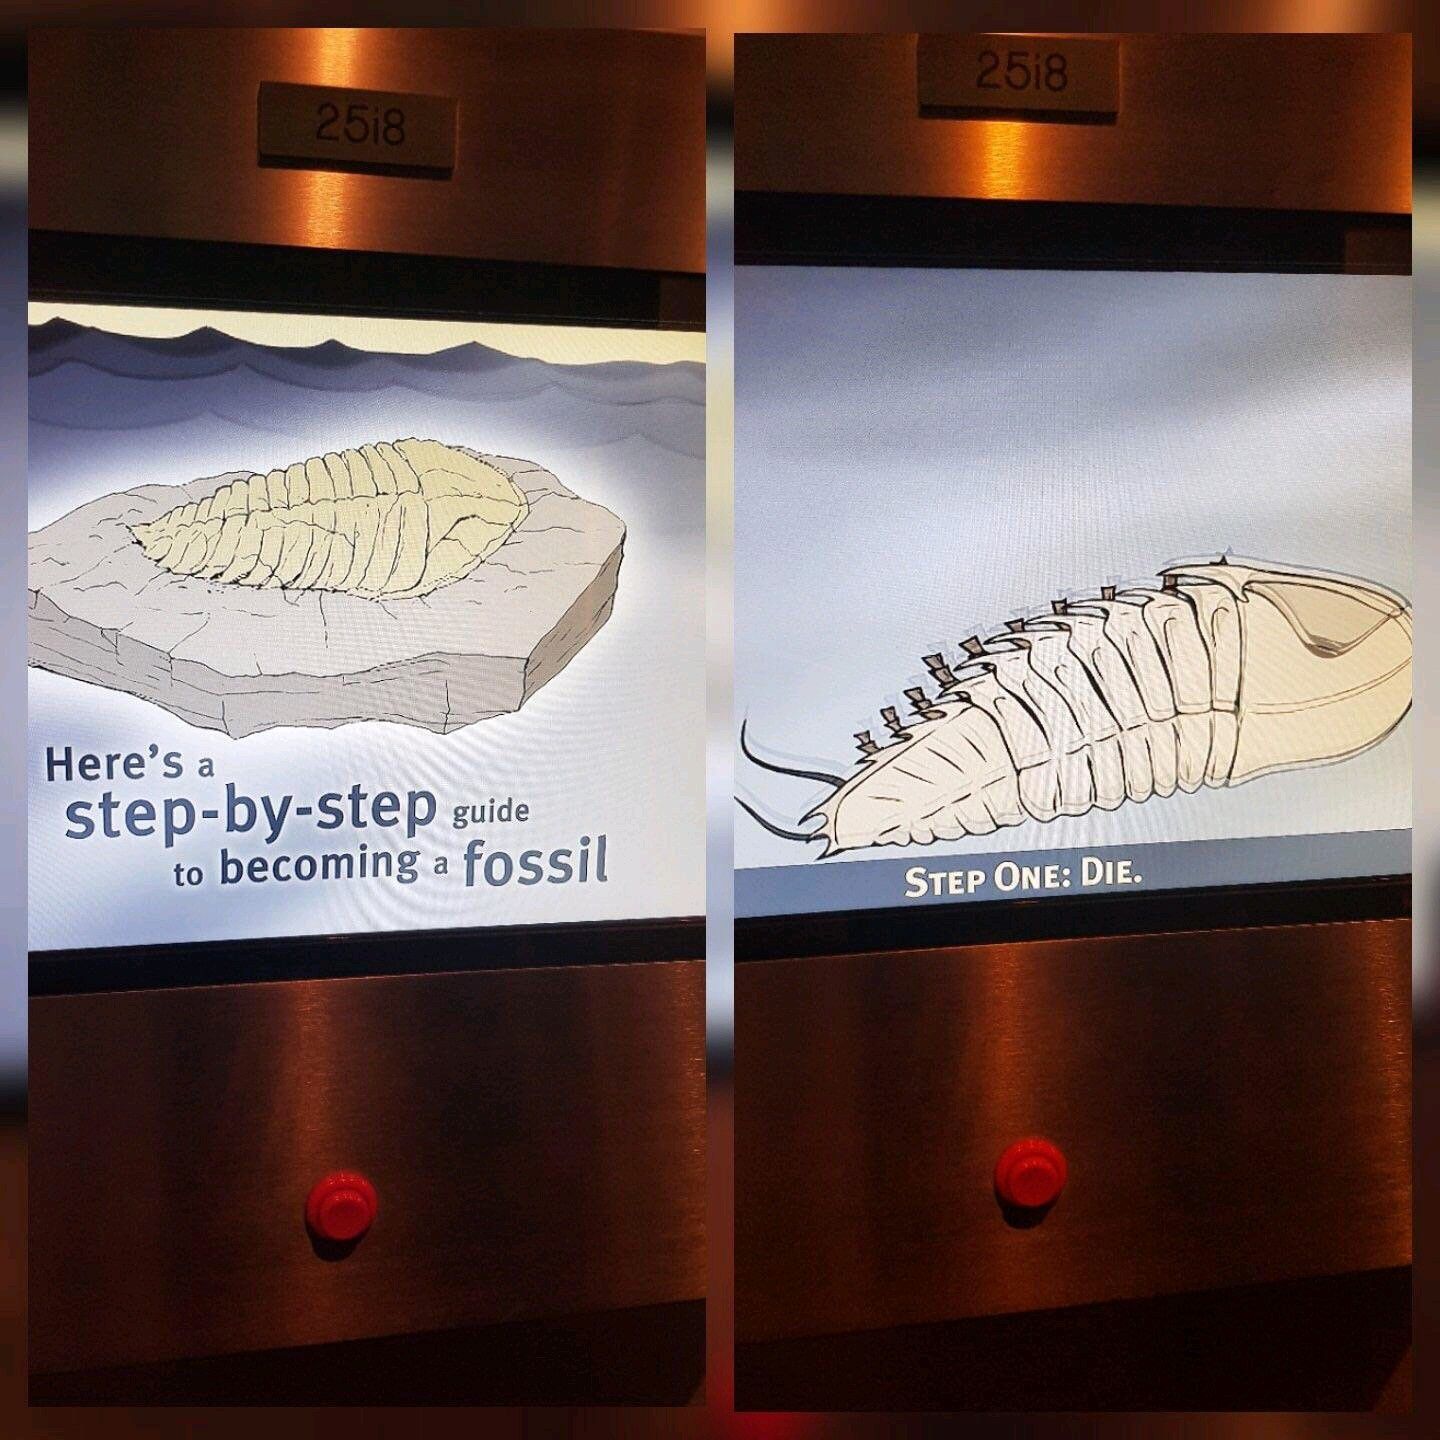 How to become a fossil